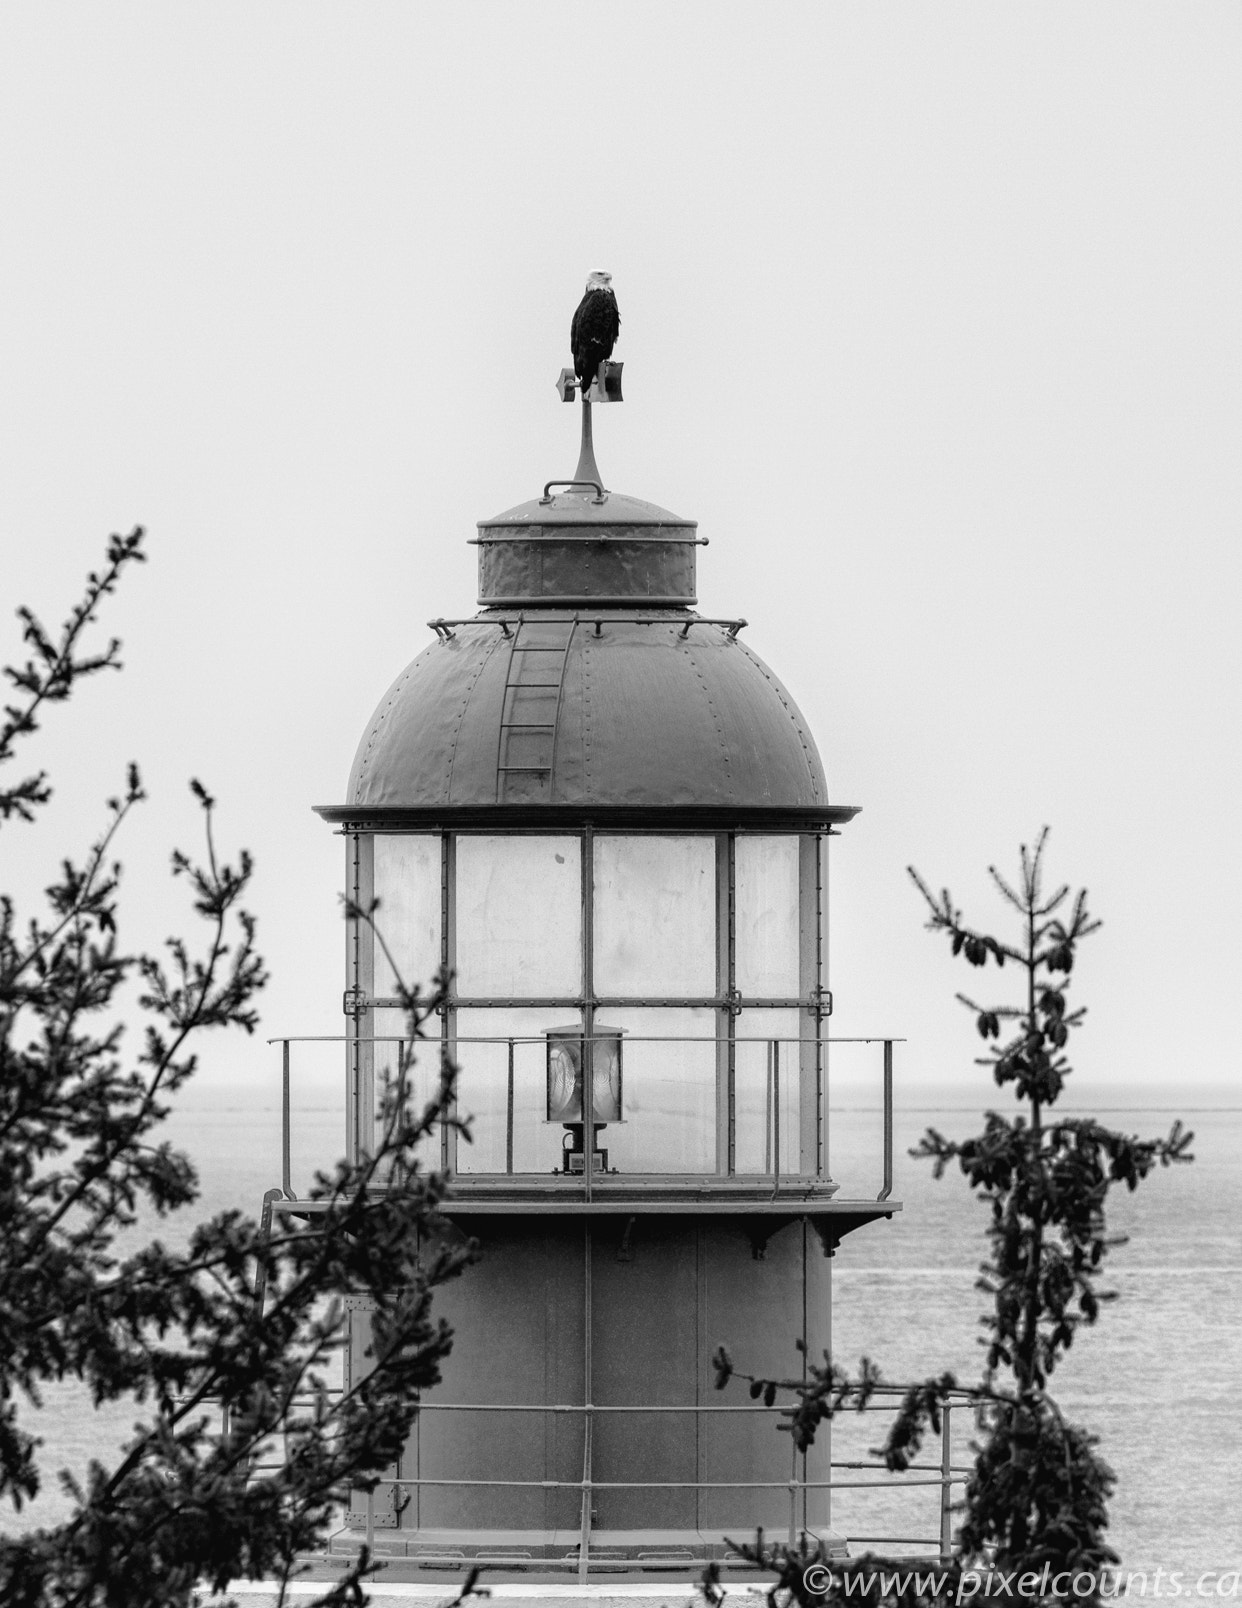 Sony a6000 sample photo. Top of the lighthouse offers a perfect vantage point for this bald eagle. photography